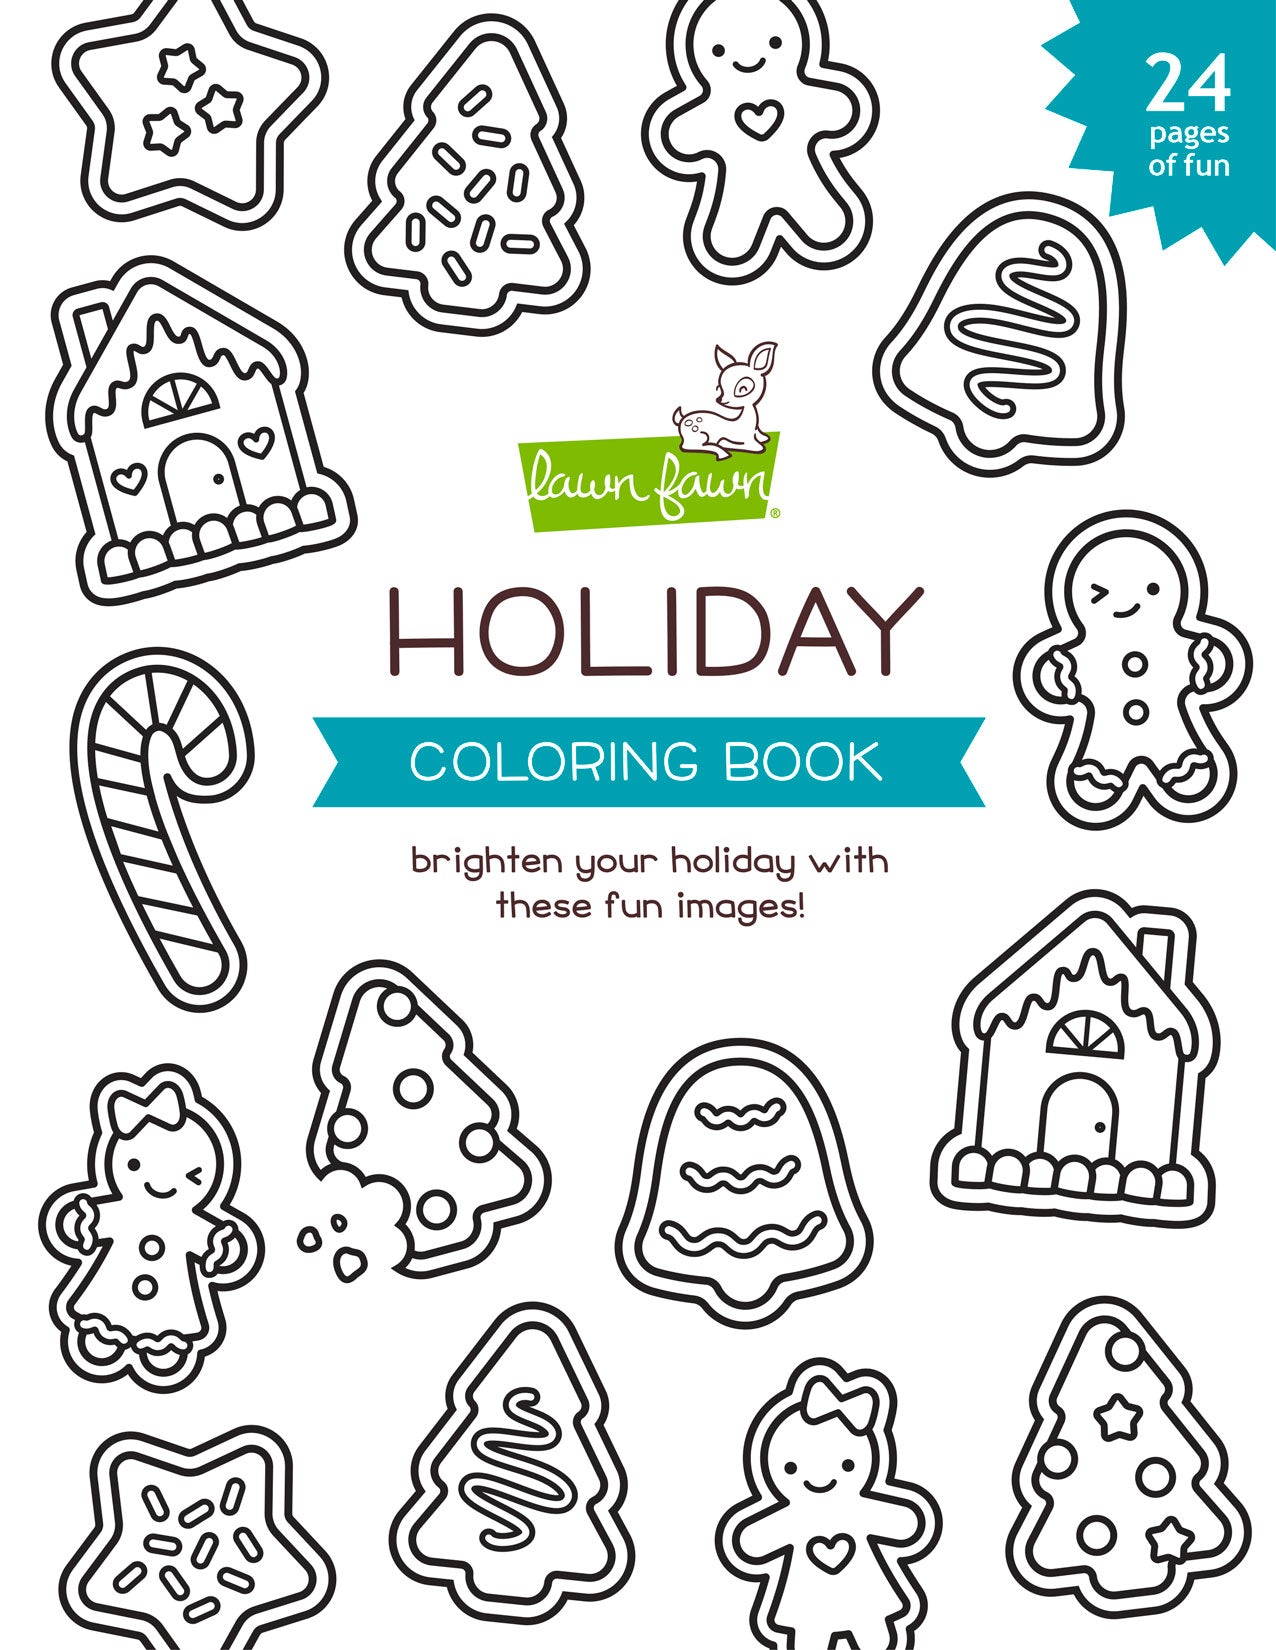 Download Holiday Coloring Book Lawn Fawn